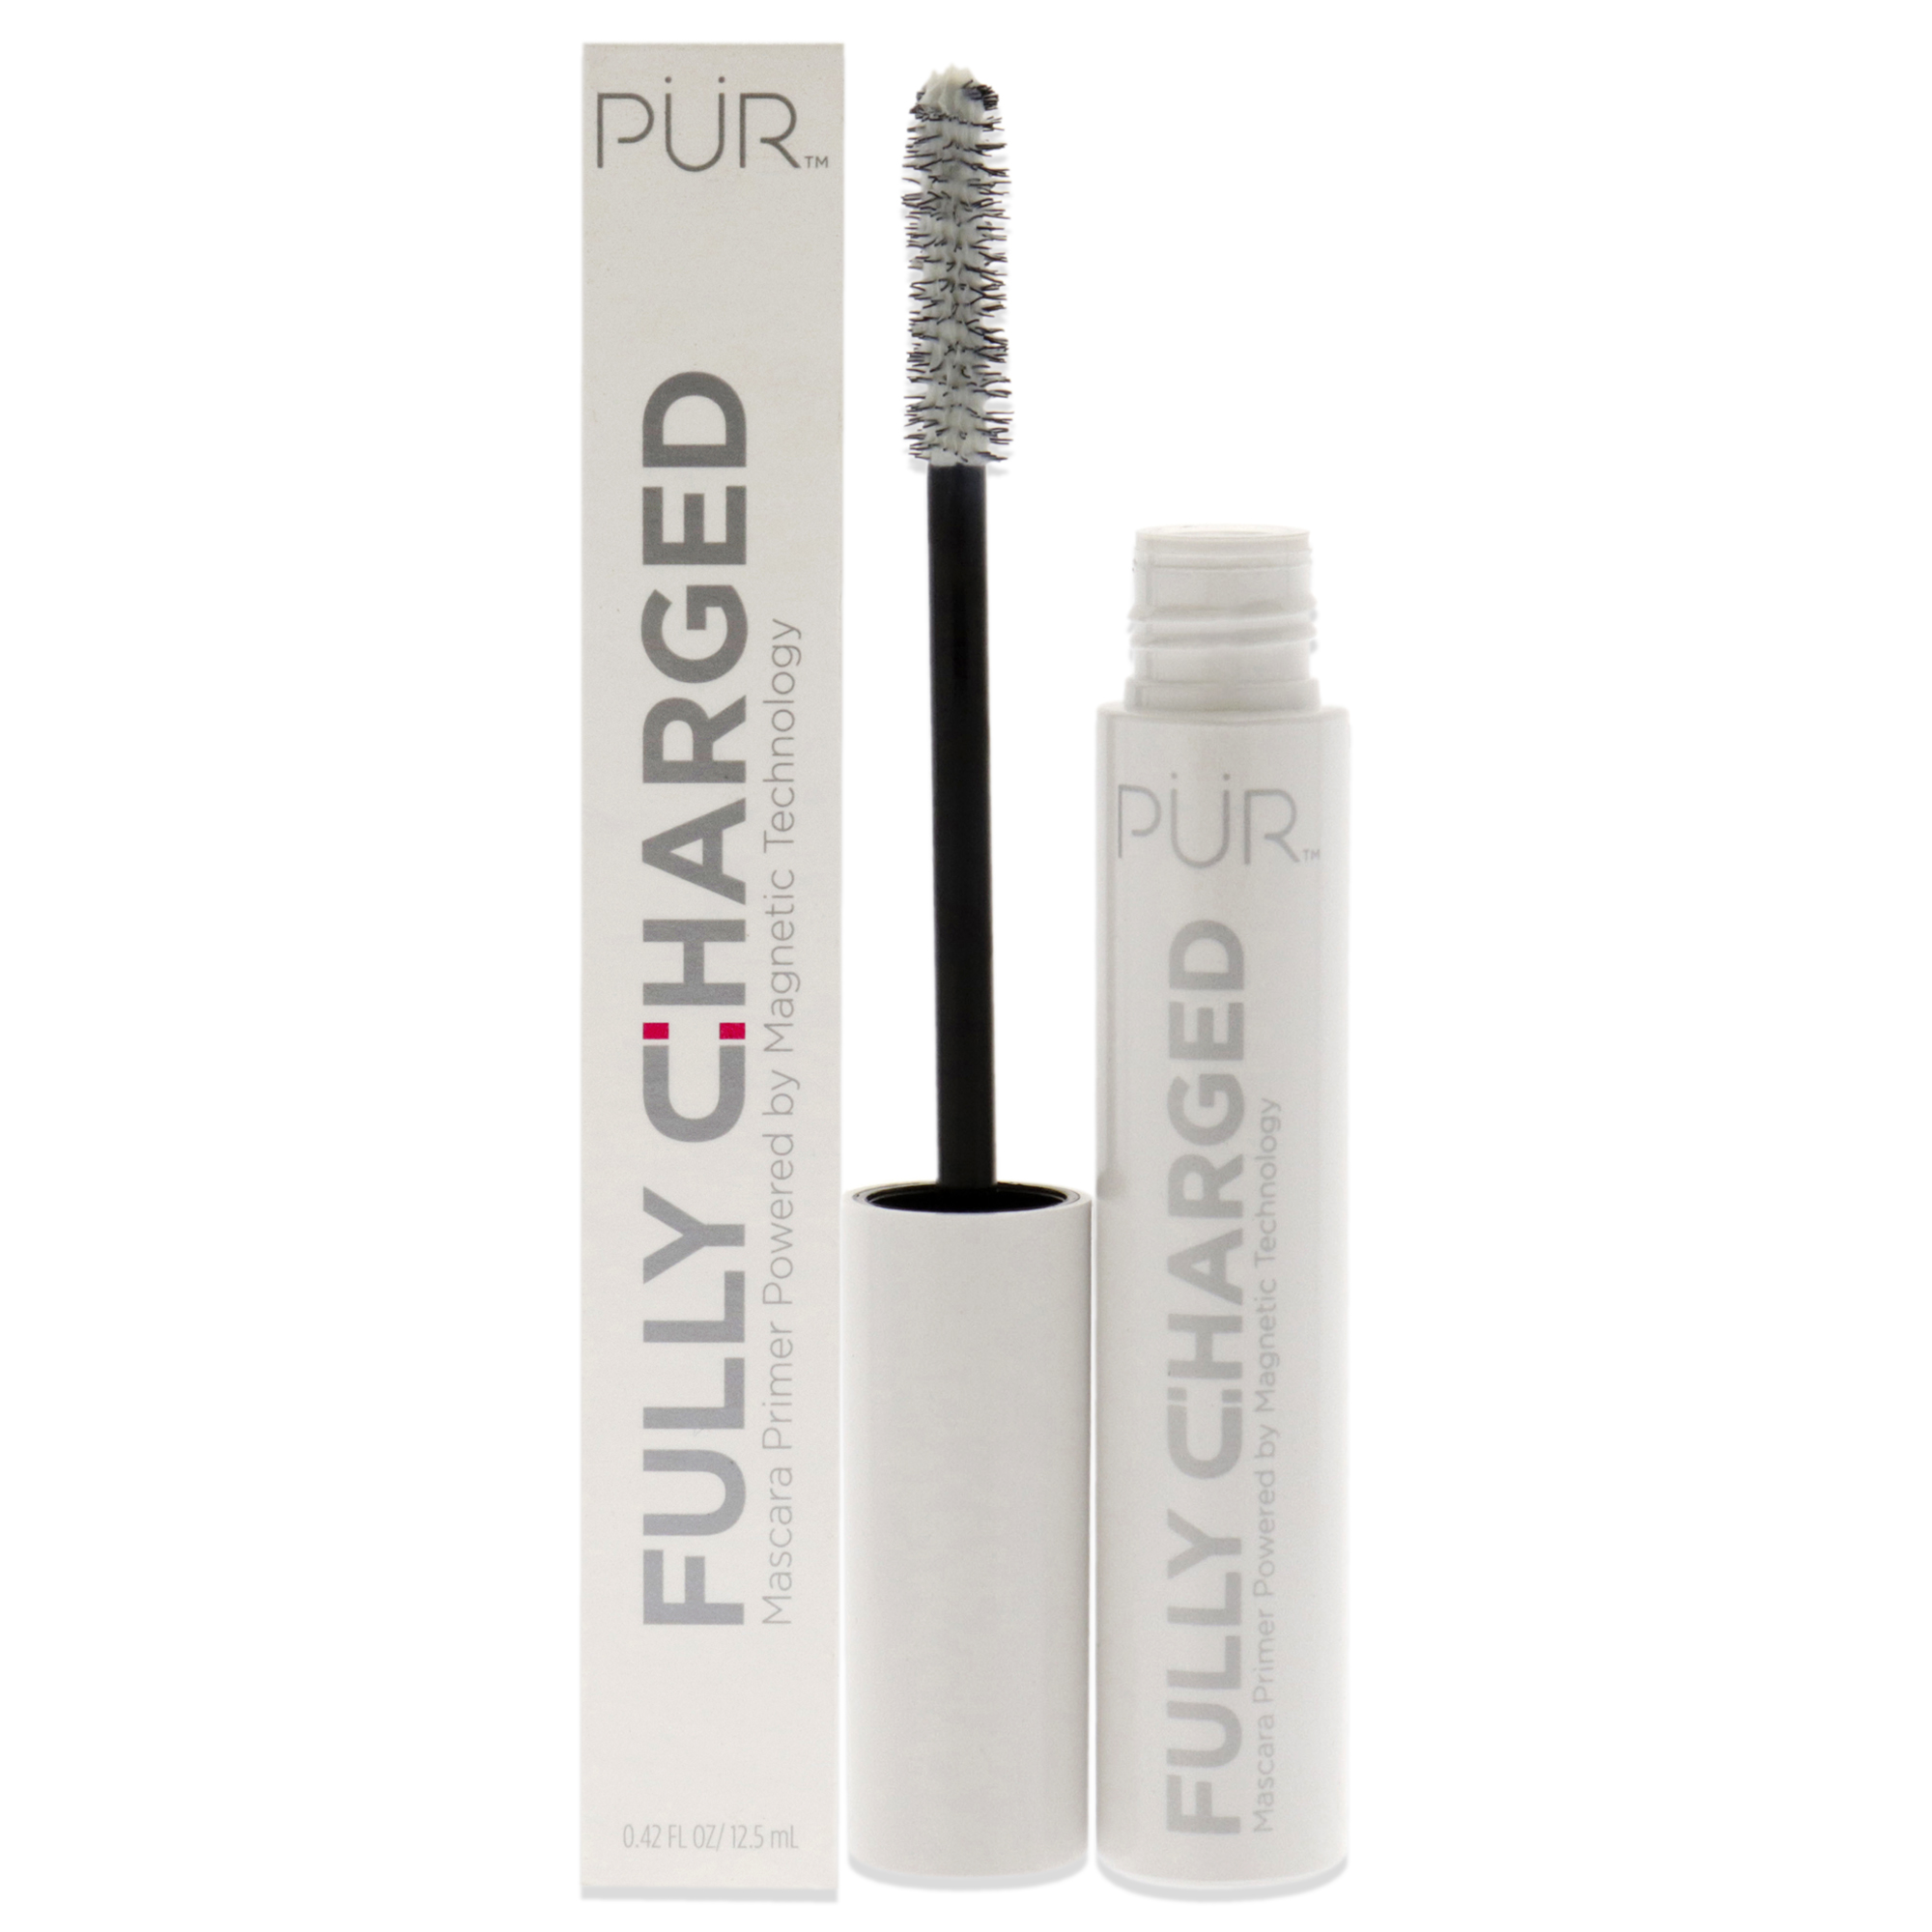 Fully Charged Mascara Primer With Magnetic Technology by Pur Minerals for Women - 0.42 oz Mascara